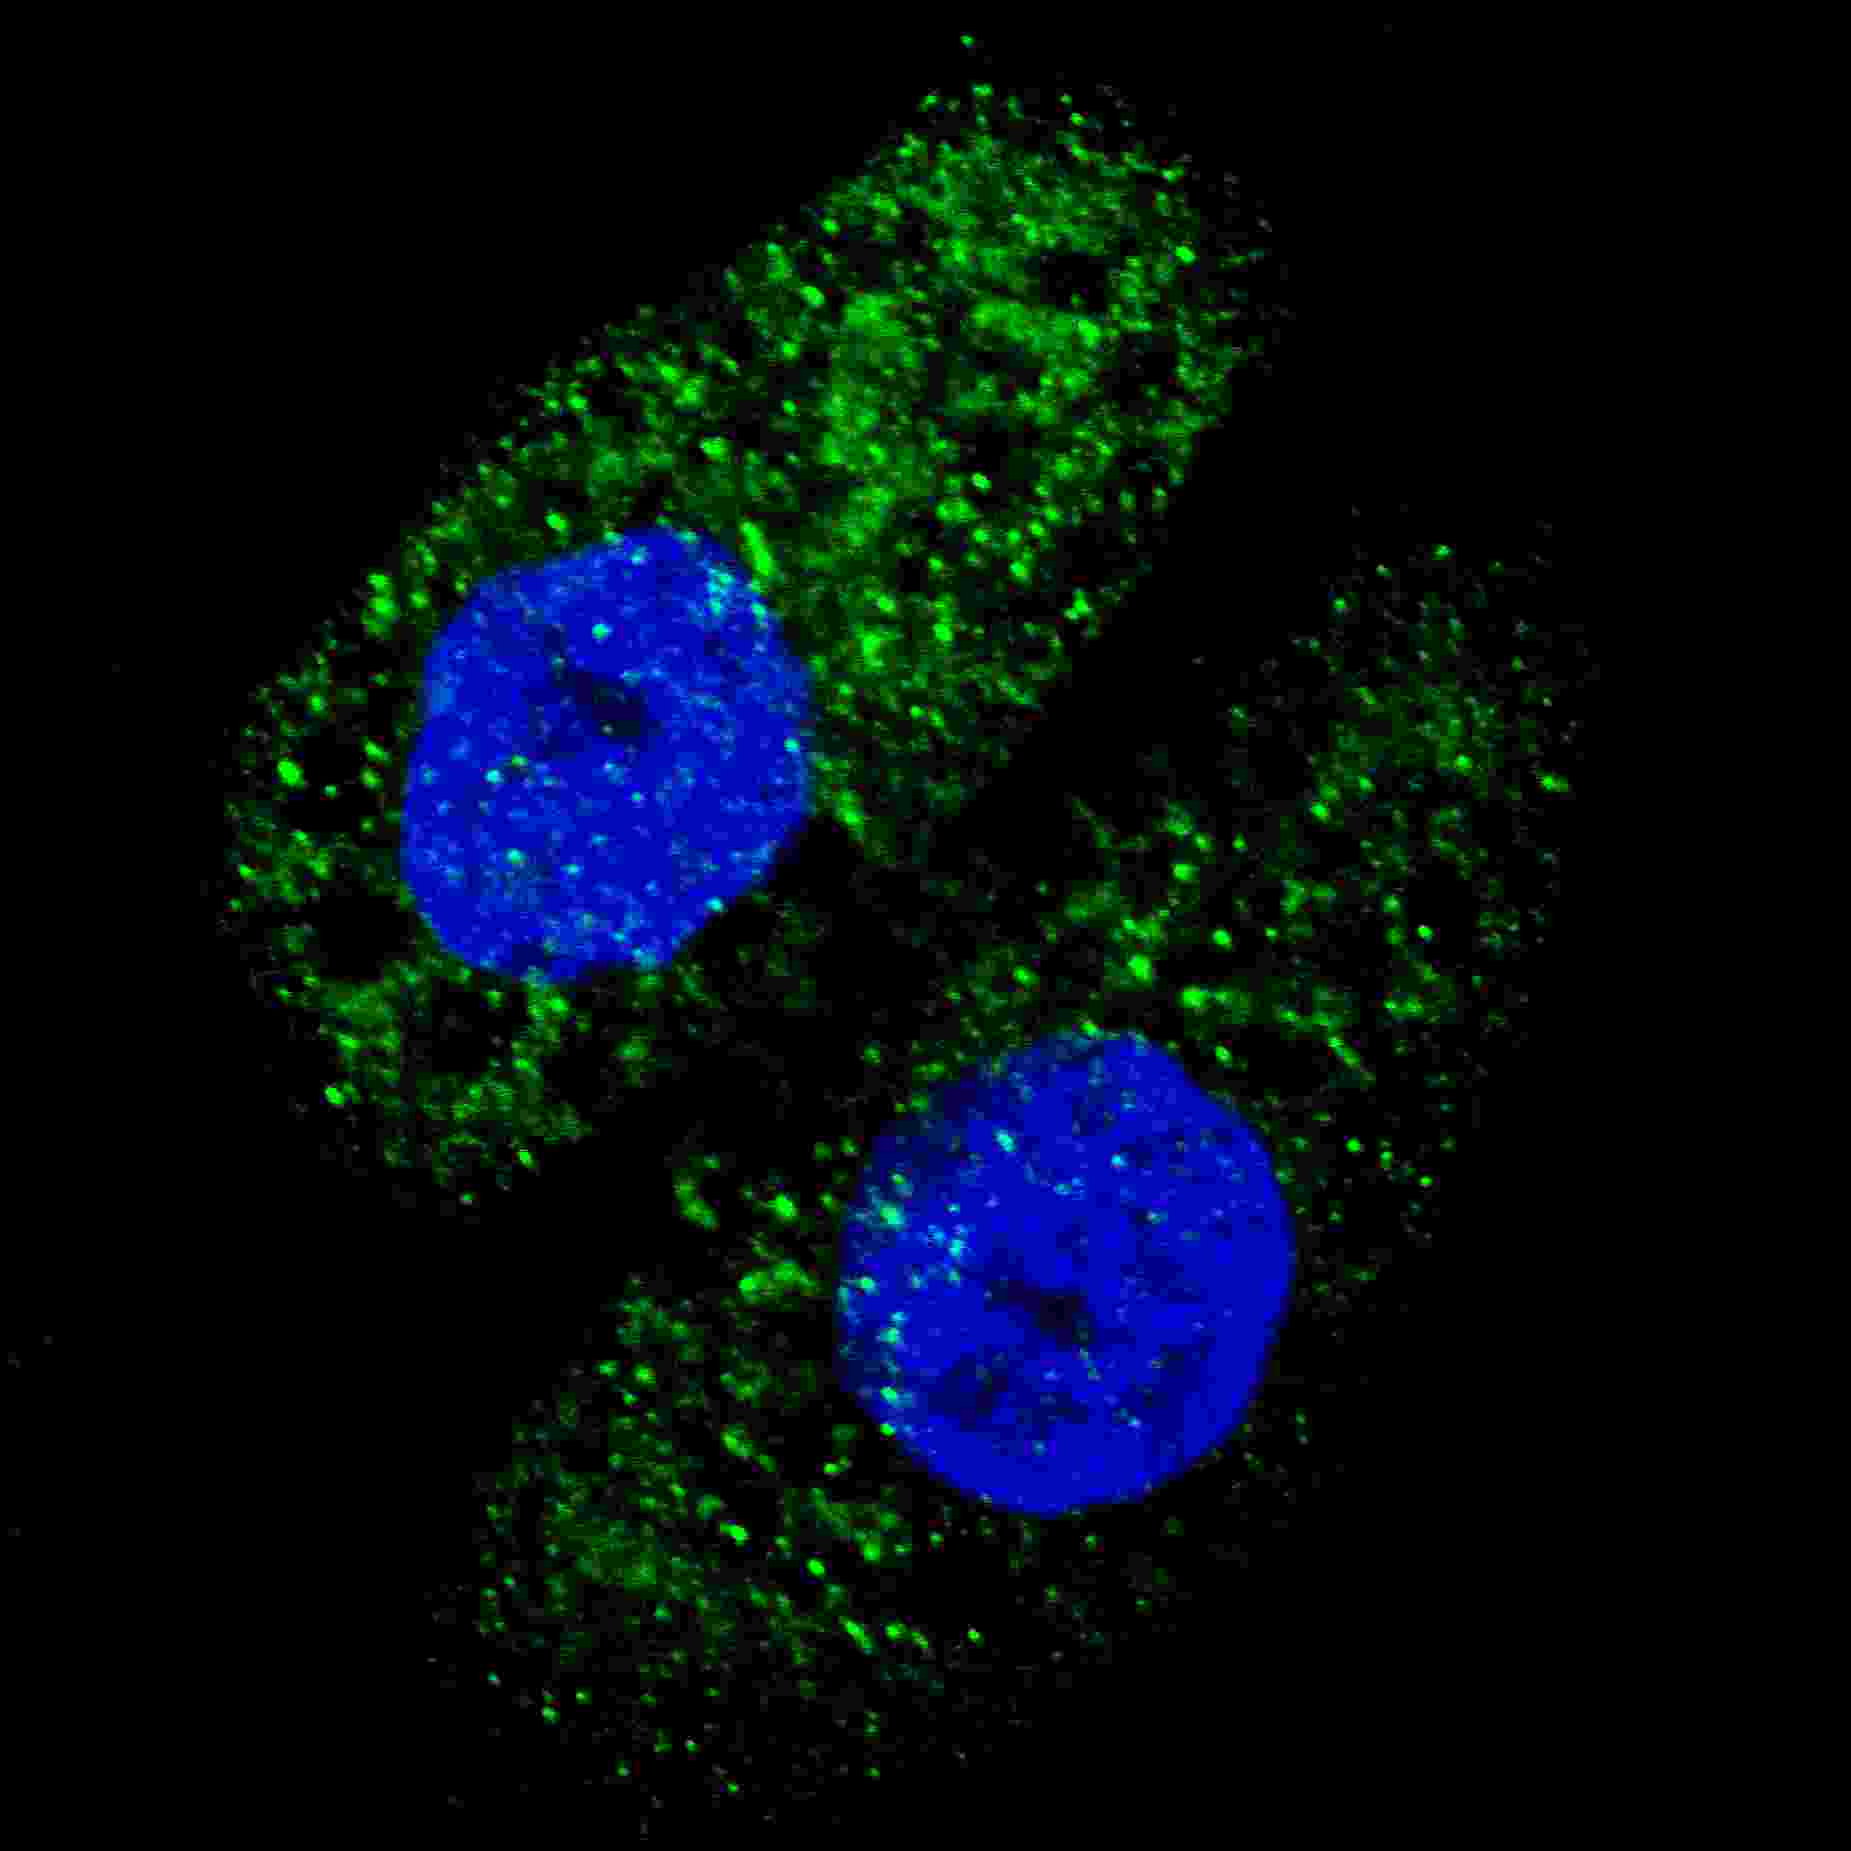 Fluorescent image of U251 cells stained with ATG5 antibody. U251 cells were treated with Chloroquine (50 ?M,16h), then fixed with 4% PFA (20 min), permeabilized with Triton X-100 (0.2%, 30 min). Cells were then incubated with AP1812c ATG5 primary antibody (1:200, 2 h at room temperature). For secondary antibody, Alexa Fluor� 488 conjugated donkey anti-rabbit antibody (green) was used (1:1000, 1h). Nuclei were counterstained with Hoechst 33342 (blue) (10 ?g/ml, 5 min). ATG5 immunoreactivity is localized to autophagic vacuoles in the cytoplasm of U251 cells.